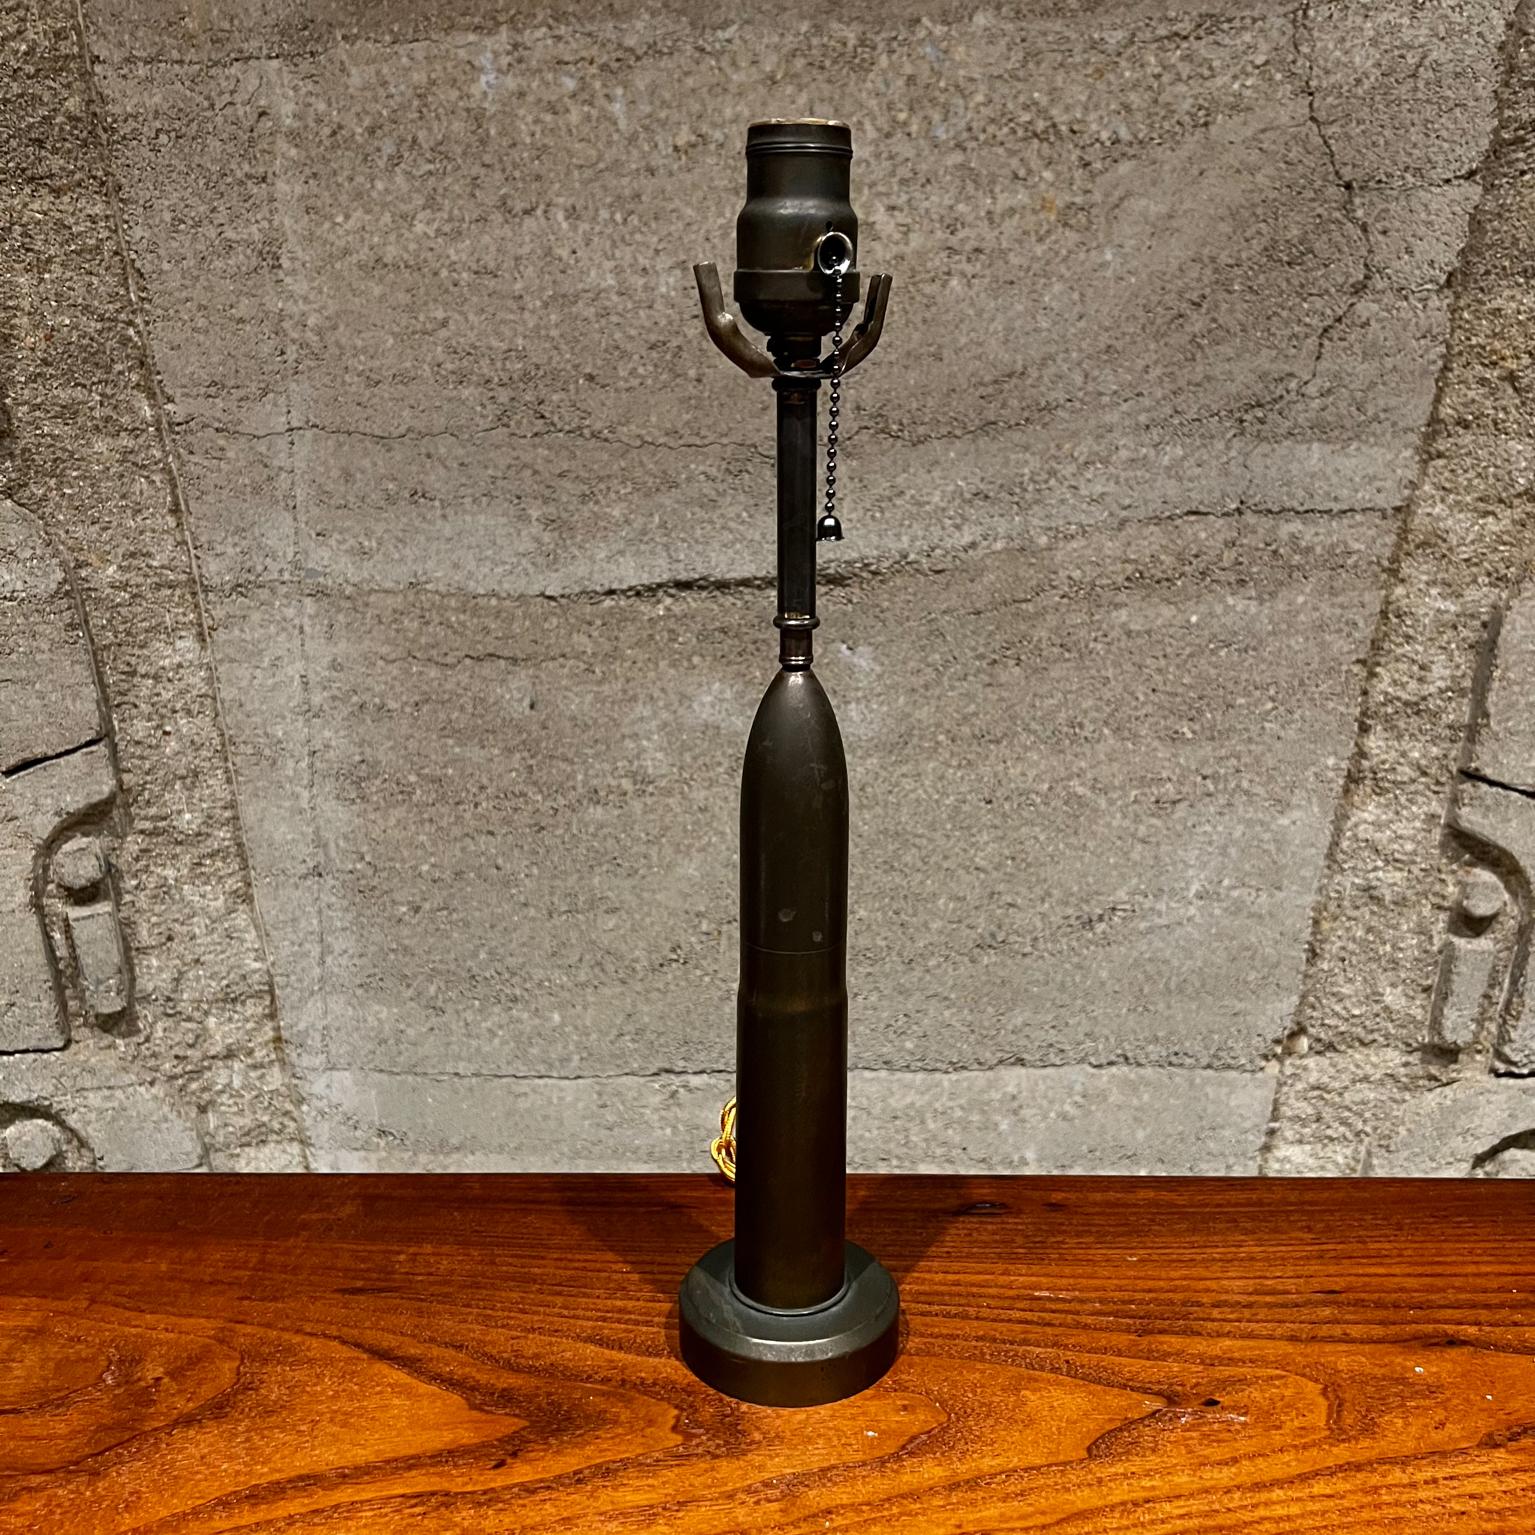 Vintage single table lamp military bullet artillery shell
designed in patinated bronze
No shade is included.
Original unrestored condition with vintage patina.
Measures: 16.5 tall x 3.25 diameter
See images provided.
 